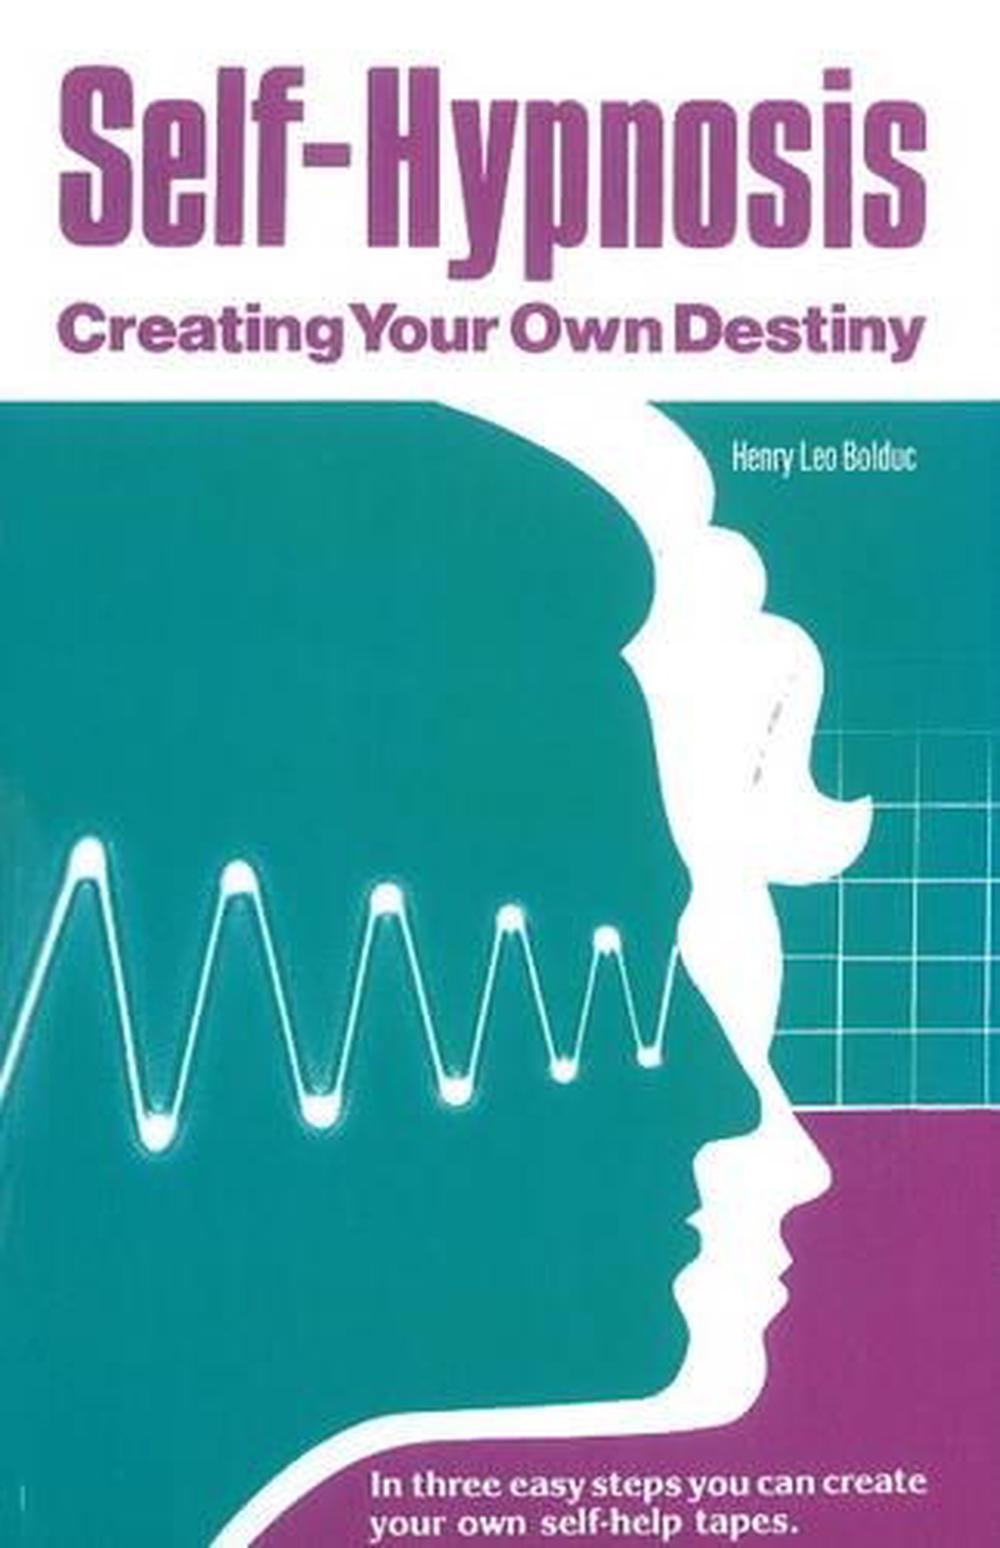 Self-Hypnosis: Creating Your Own Destiny by Henry Leo Bolduc (English) Paperback